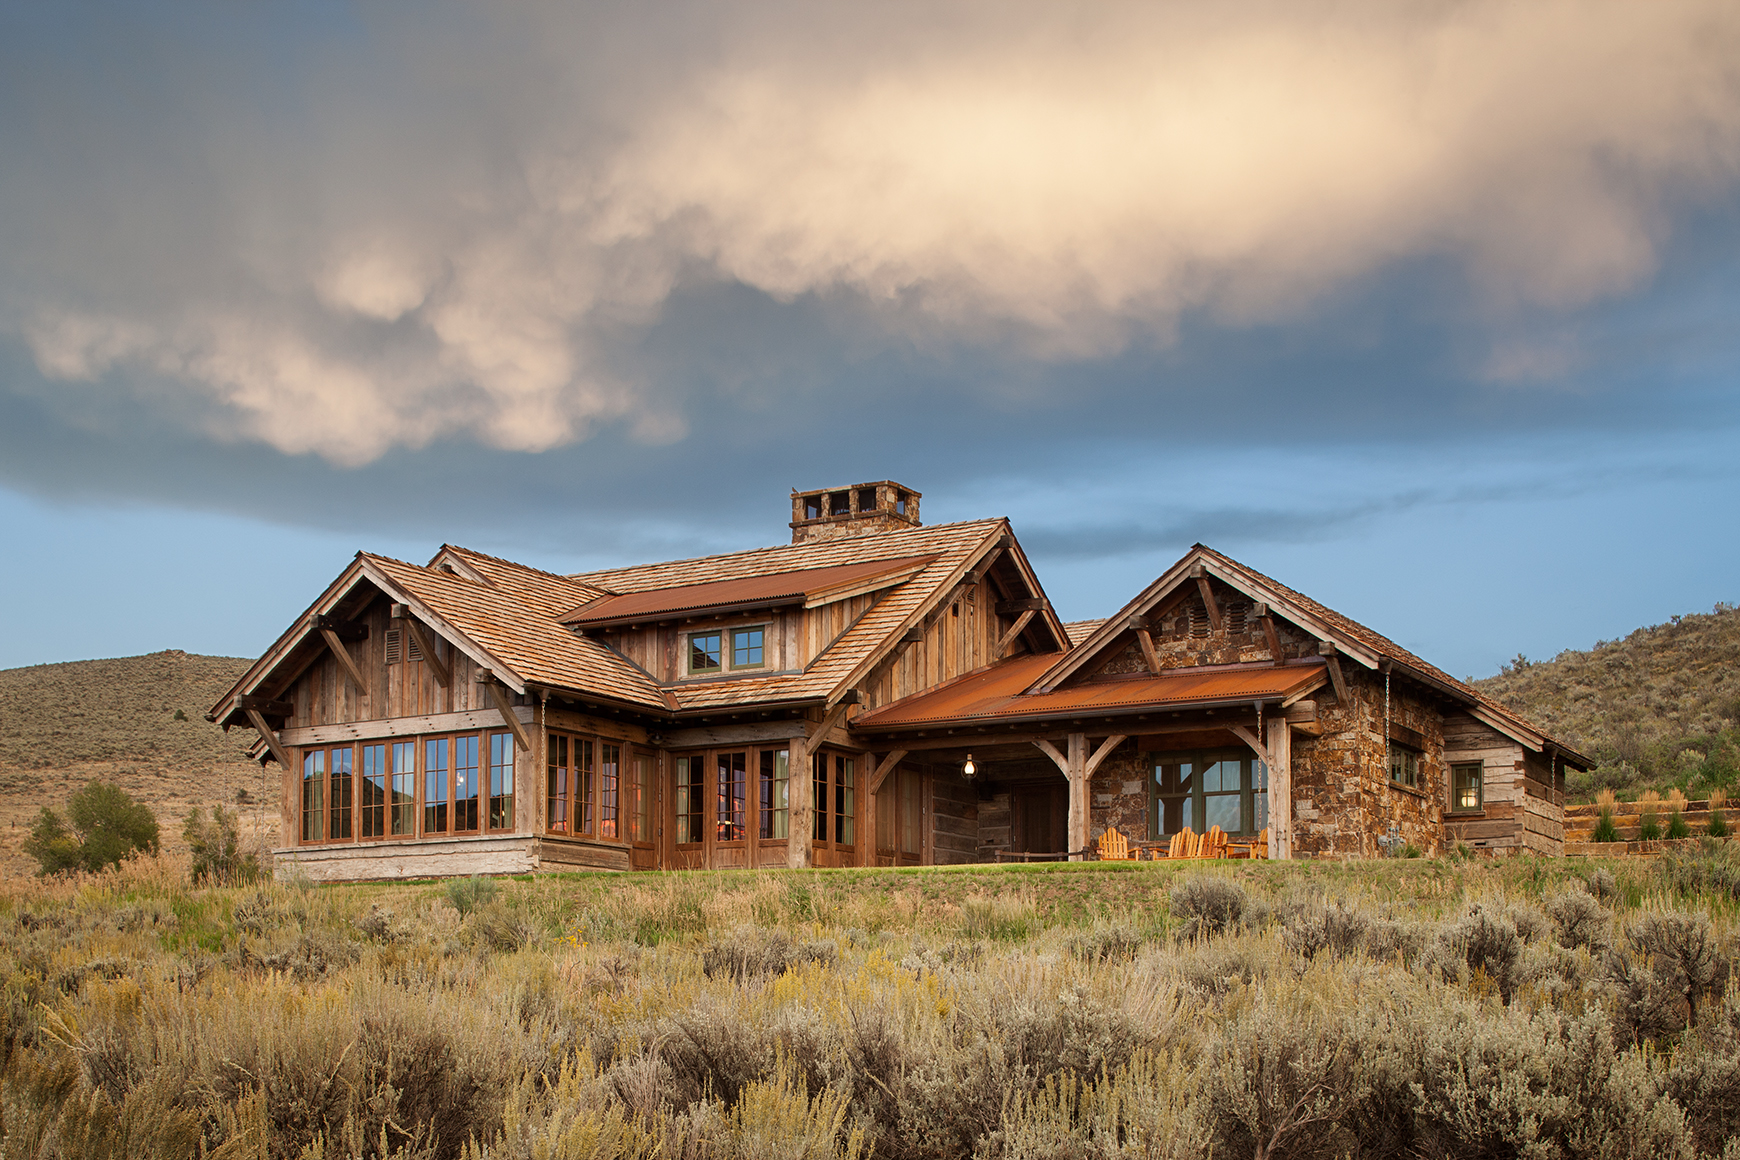 This is an exterior view of a rustic home with reclained timbers amidst the sage brush of Park City, UT. The photo was taken in late afternoon and has very dramatic clouds over head.